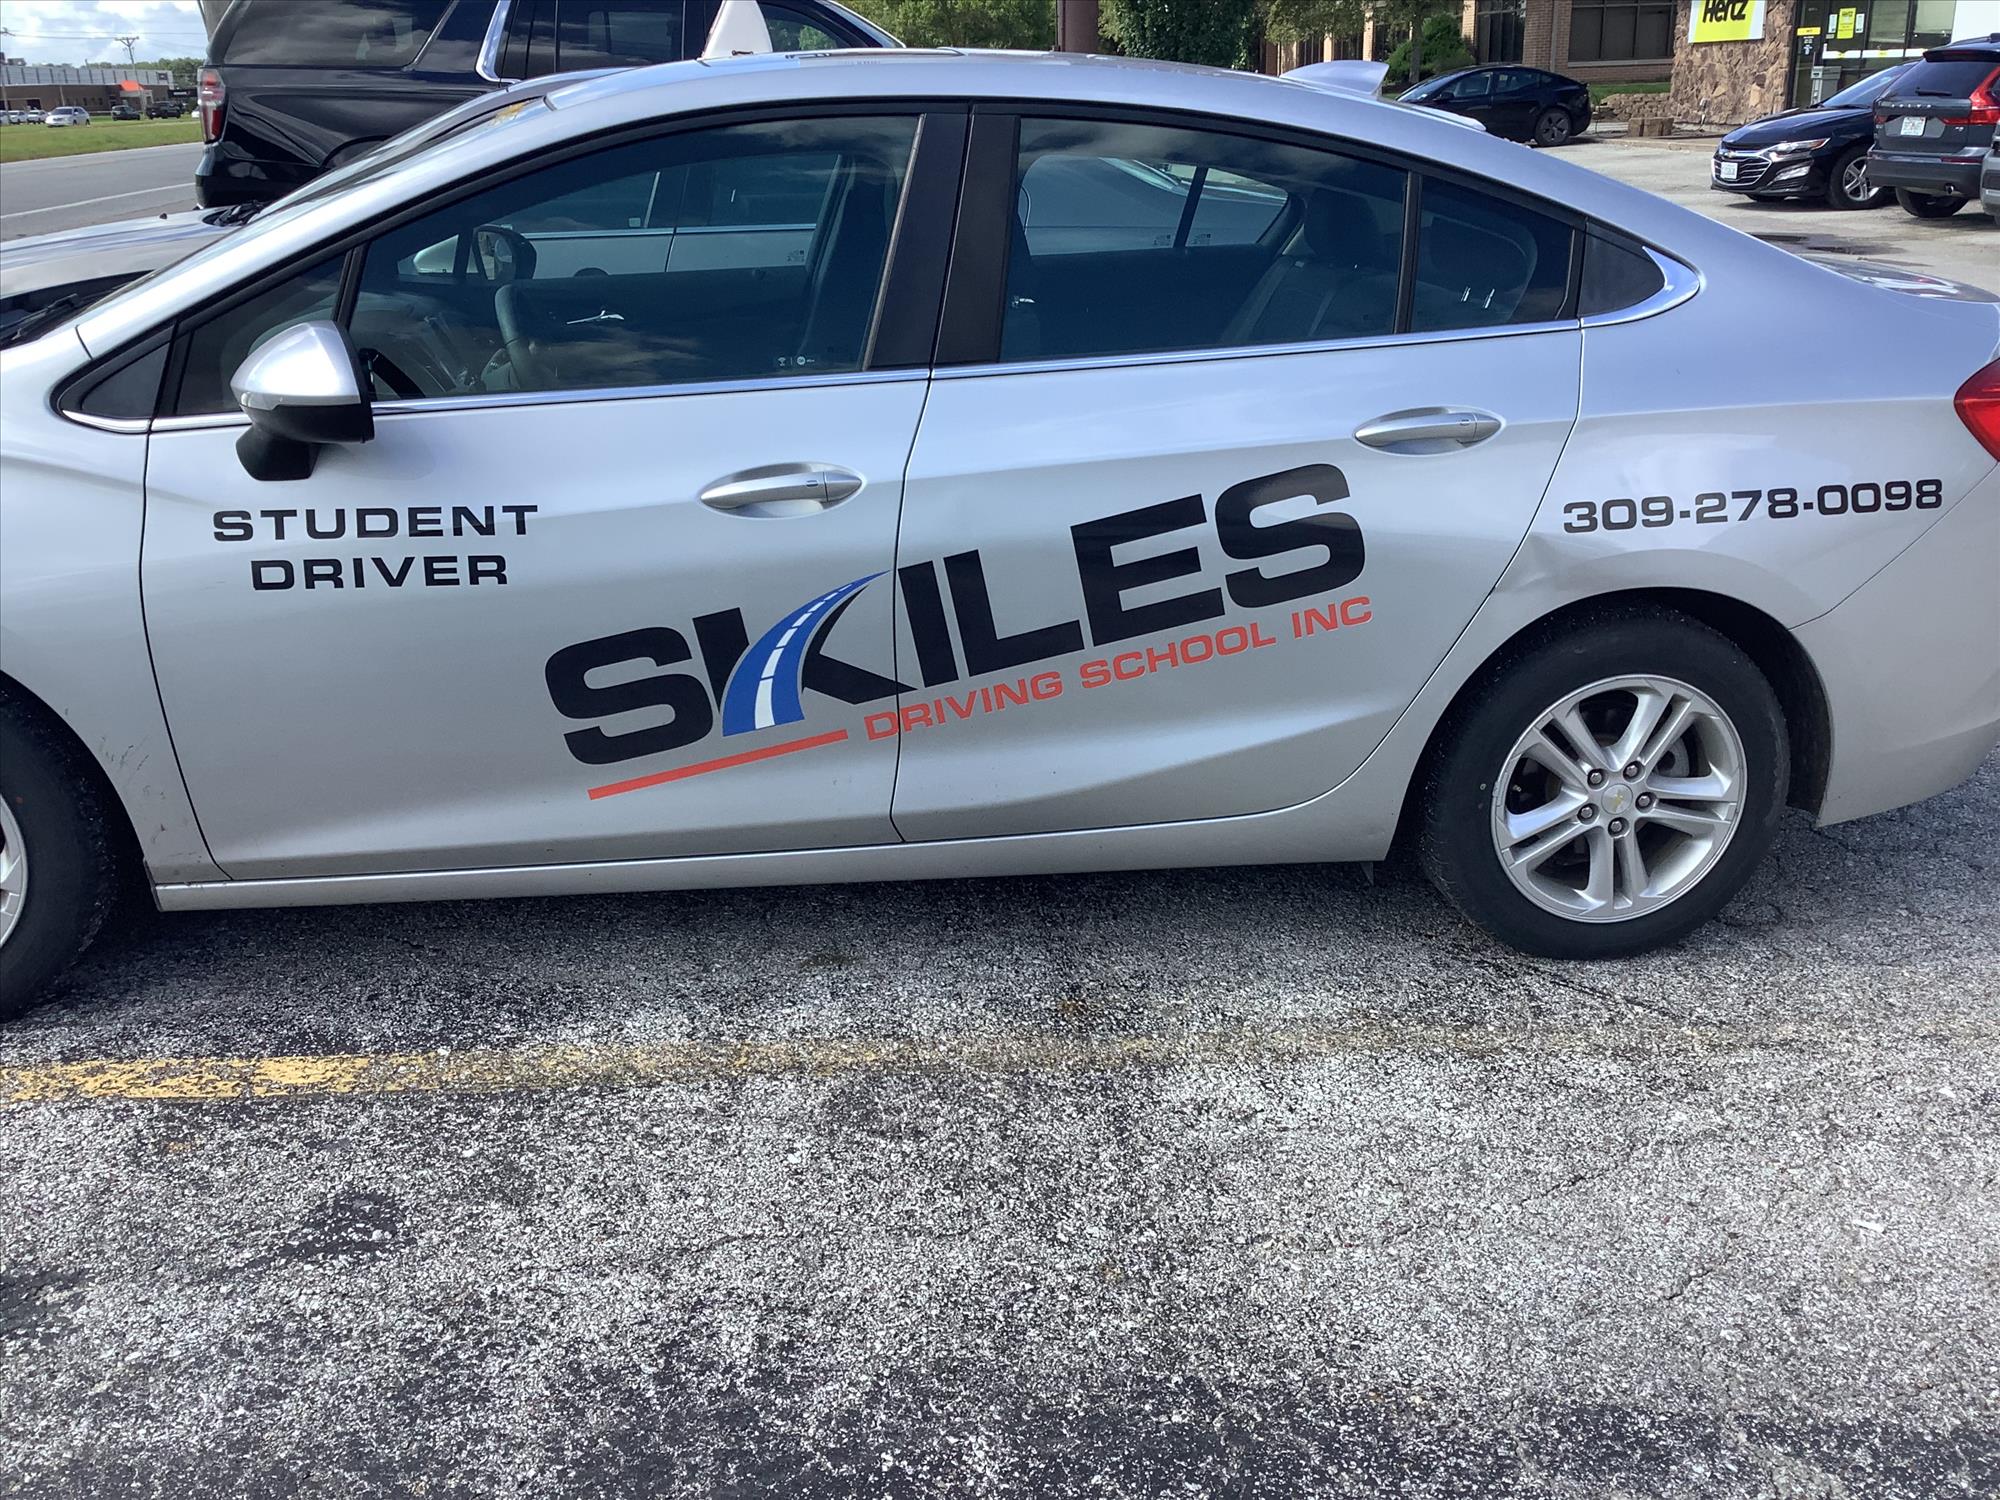 Skiles Driving School 485 Avenue of the Cities # 3, East Moline Illinois 61244